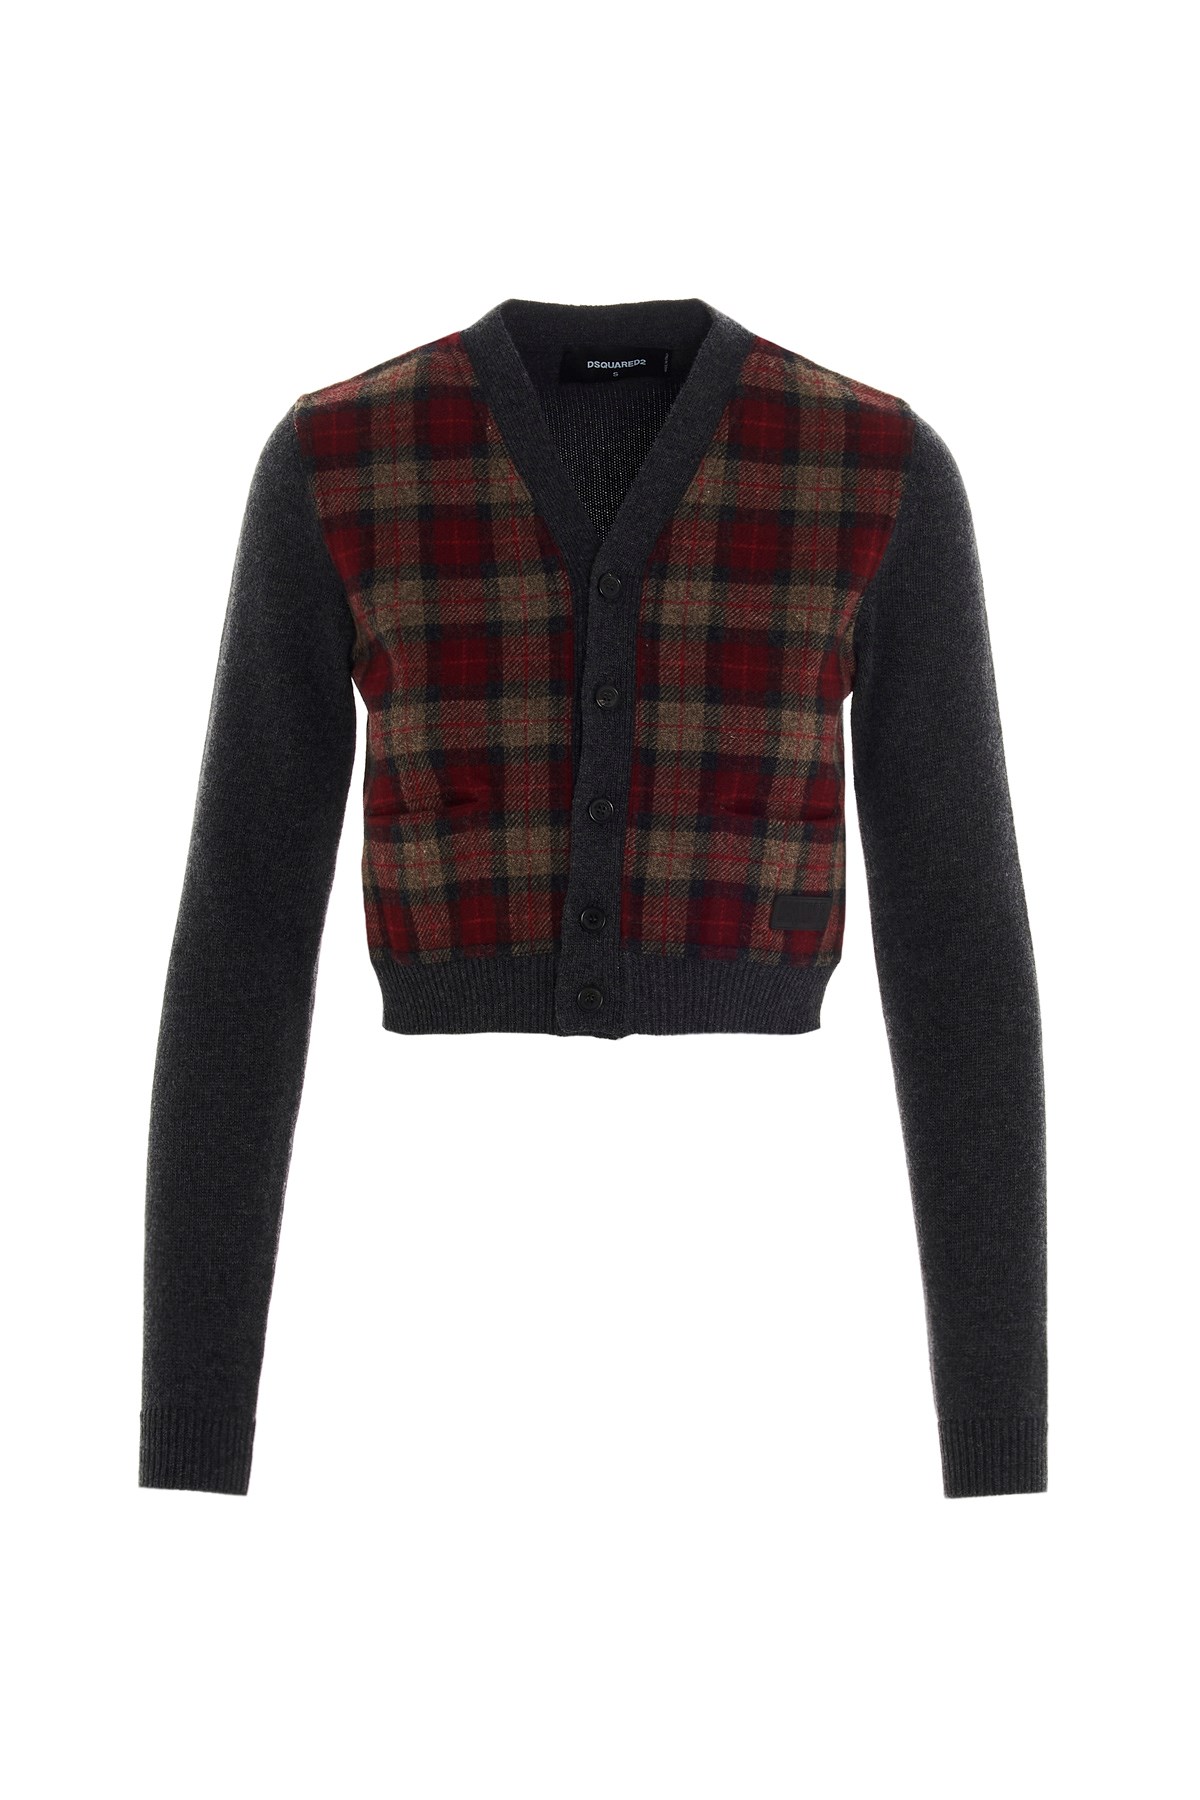 DSQUARED2 All Over Check Wool Cardigan